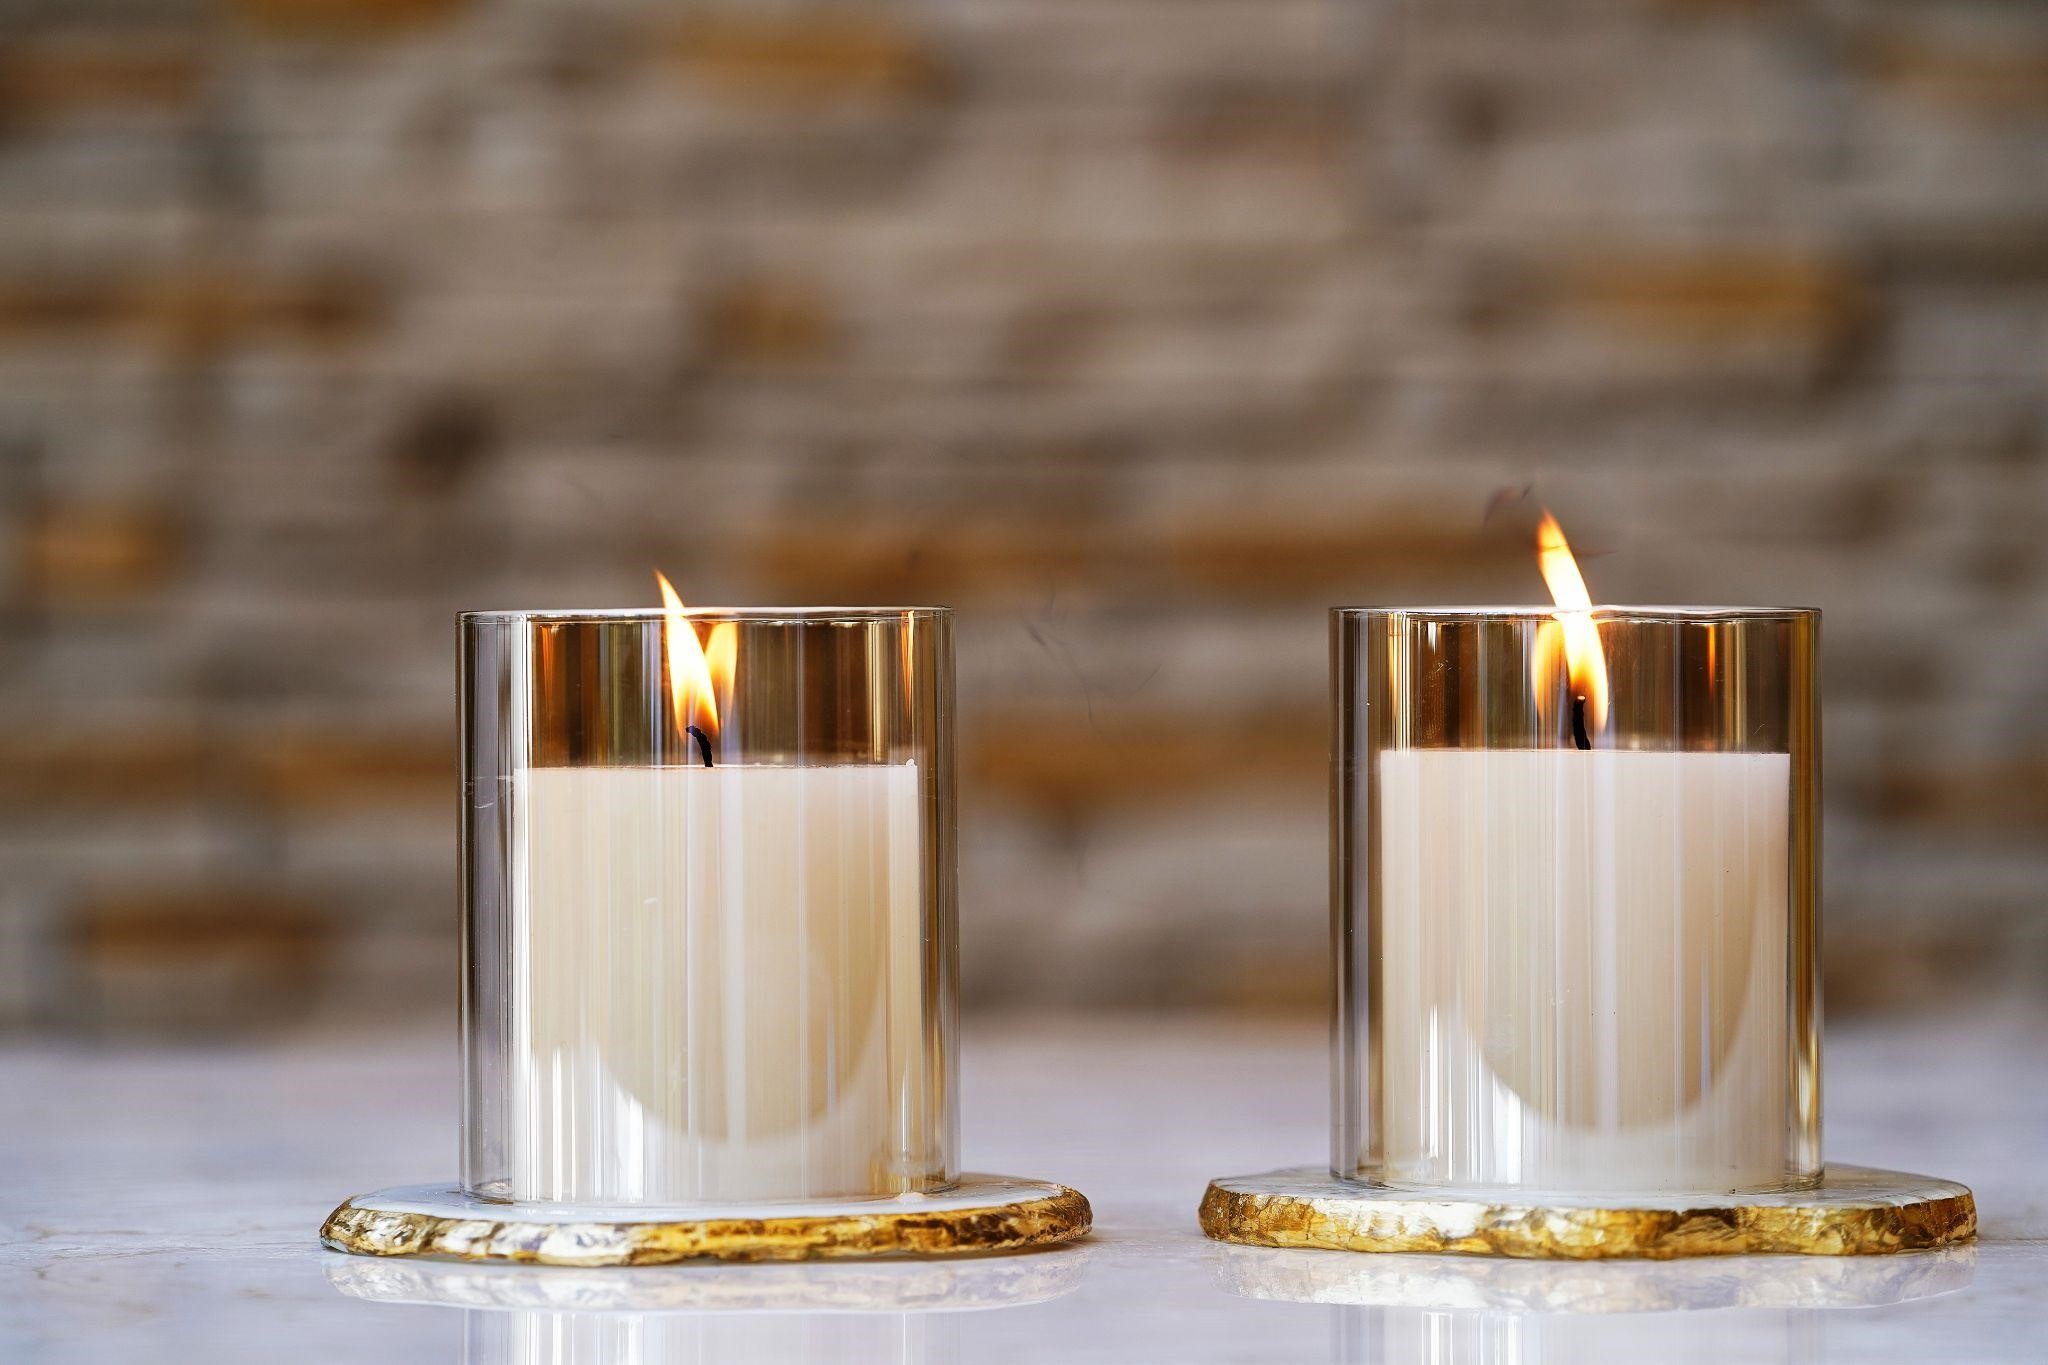 A Concise Scented Candle Gift Guide for 2023